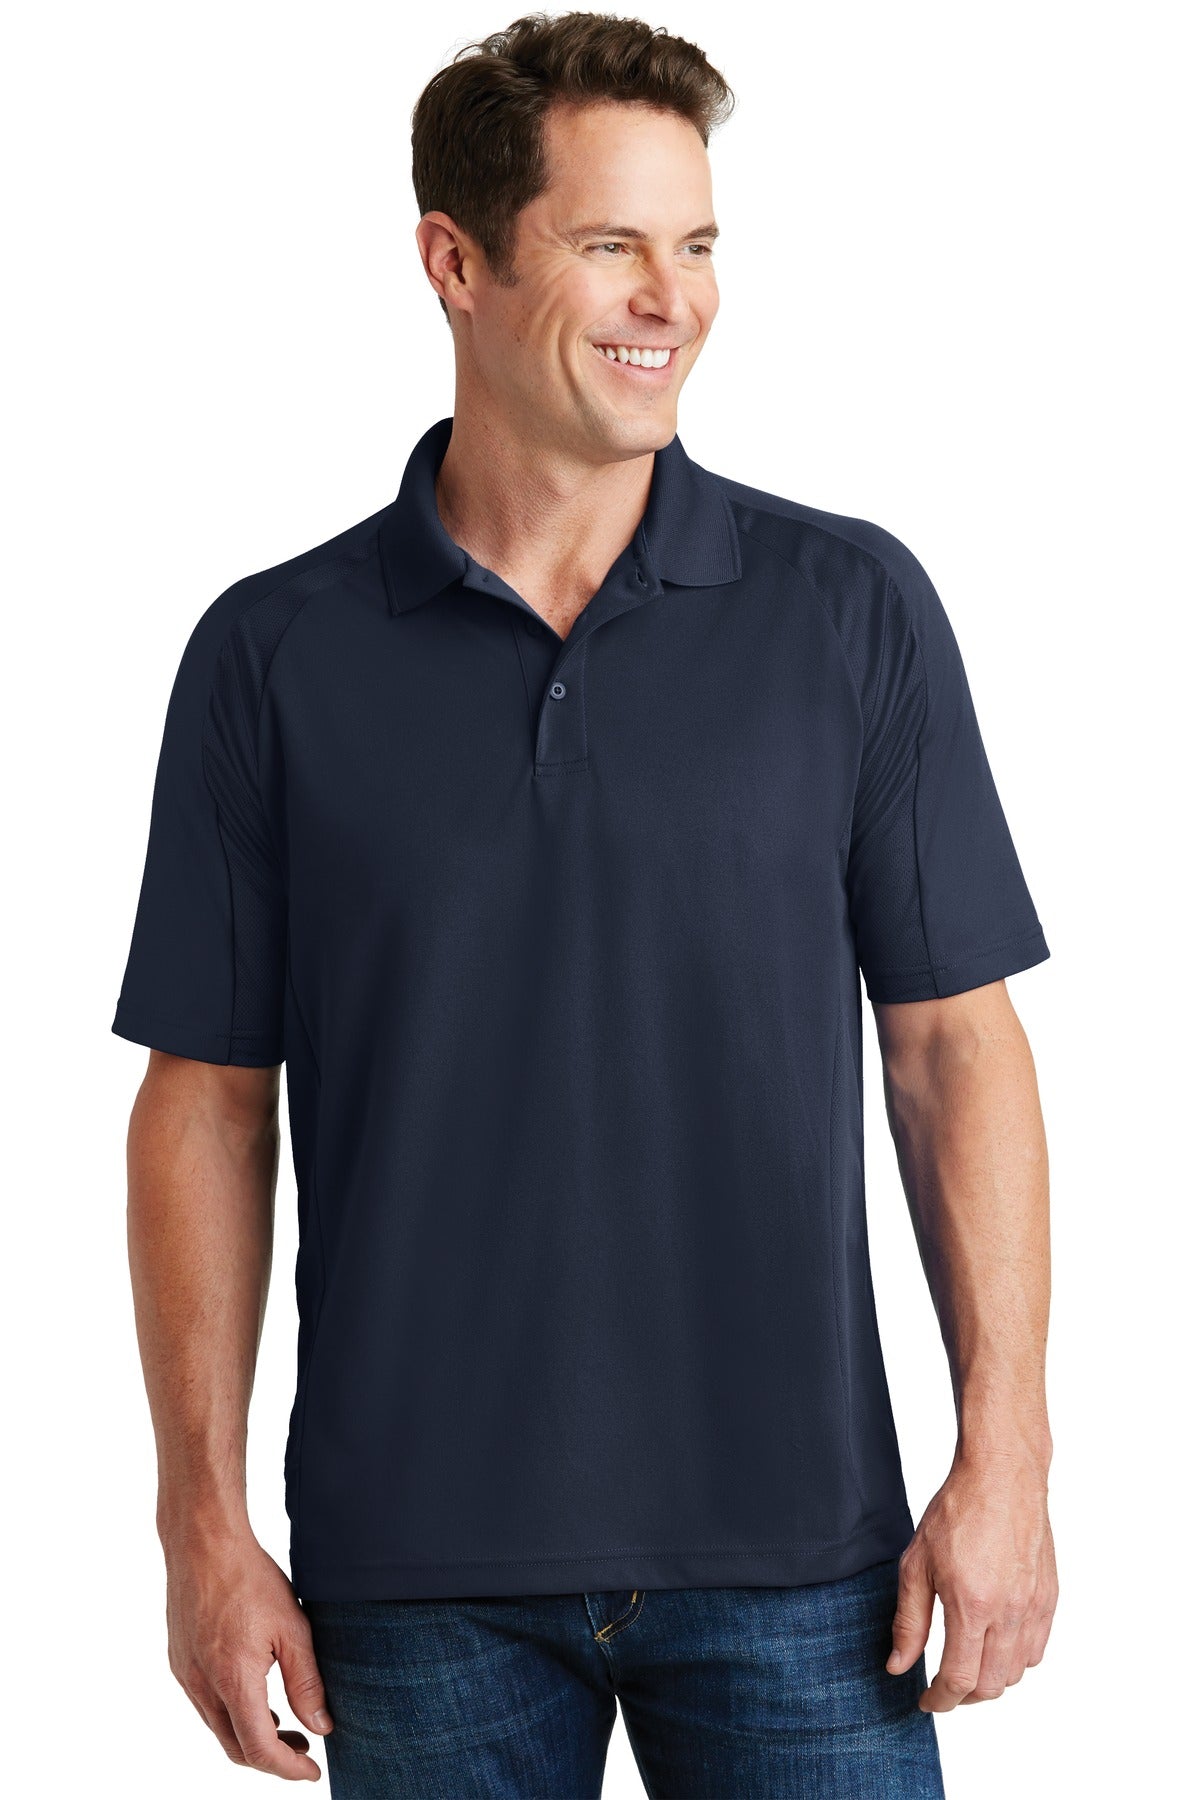 Photo of Sport-Tek Polos/Knits T474  color  Navy